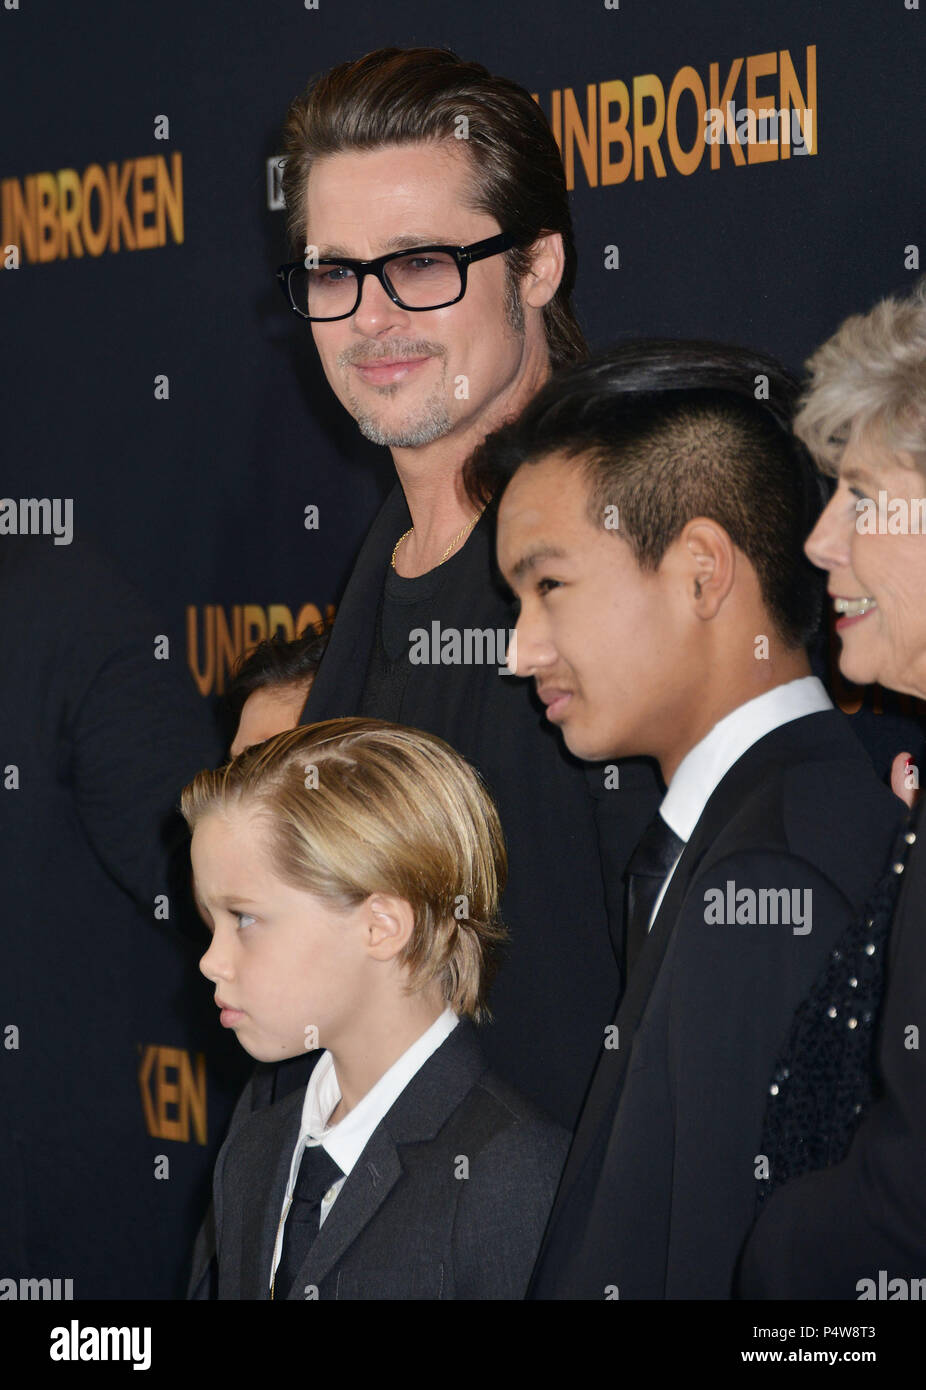 Brad Pitt, (L-R) Pax Thien Jolie-Pitt, Shiloh Nouvel Jolie-Pitt,, Maddox Jolie-Pitt, Jane Pitt, and William Pitt 050  at the Unbroken Premiere at the Dolby Theatre in Los Angeles. Dec. 14, 2014Brad Pitt, (L-R) Pax Thien Jolie-Pitt, Shiloh Nouvel Jolie-Pitt,, Maddox Jolie-Pitt, Jane Pitt, and William Pitt 050 ------------- Red Carpet Event, Vertical, USA, Film Industry, Celebrities,  Photography, Bestof, Arts Culture and Entertainment, Topix Celebrities fashion /  Vertical, Best of, Event in Hollywood Life - California,  Red Carpet and backstage, USA, Film Industry, Celebrities,  movie celebrit Stock Photo